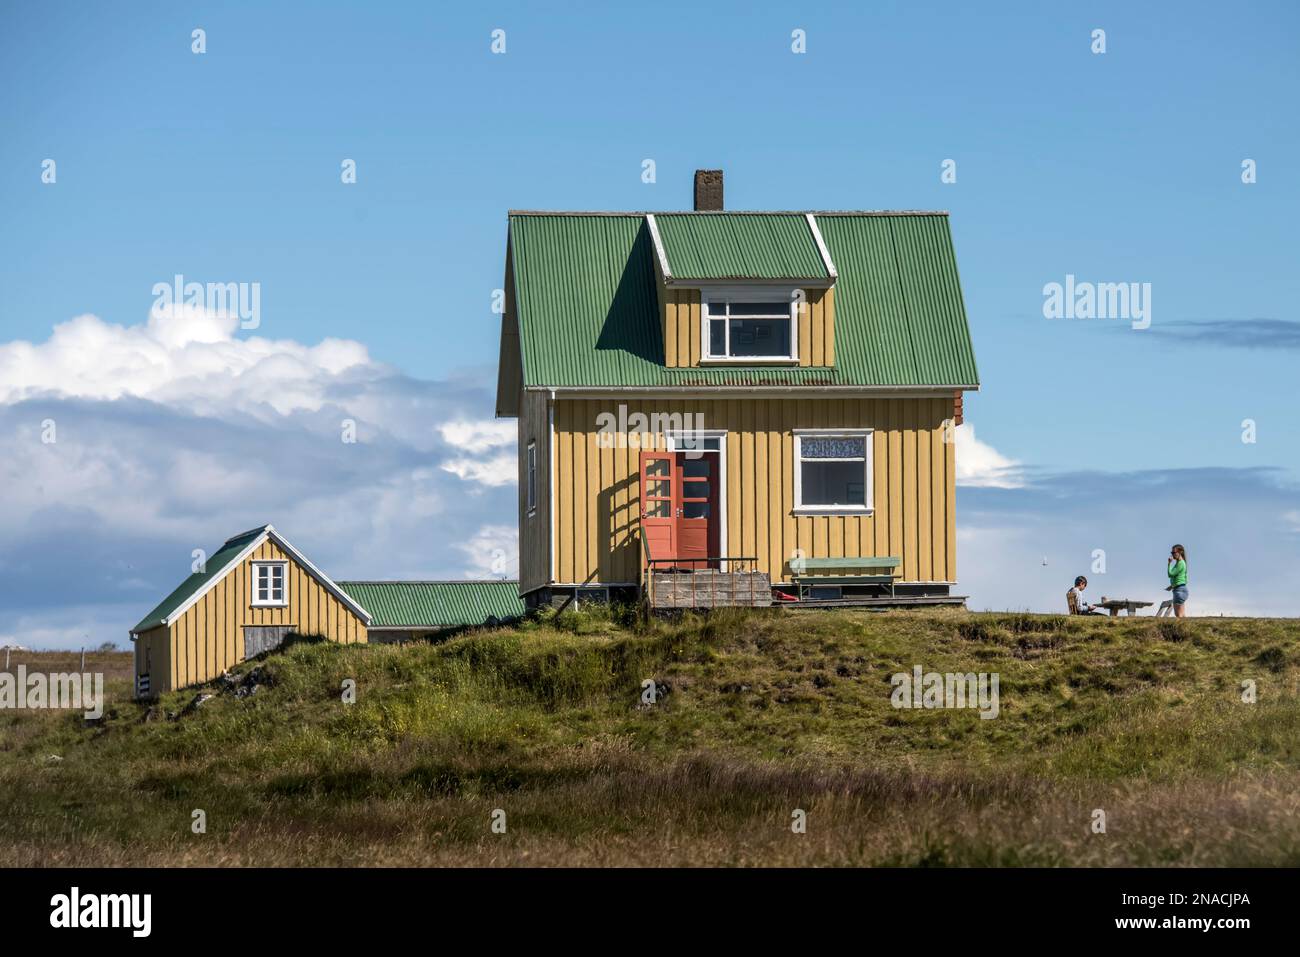 House in the town of Flatey, Iceland, a former fishing village that is now a tourist destination. Stock Photo